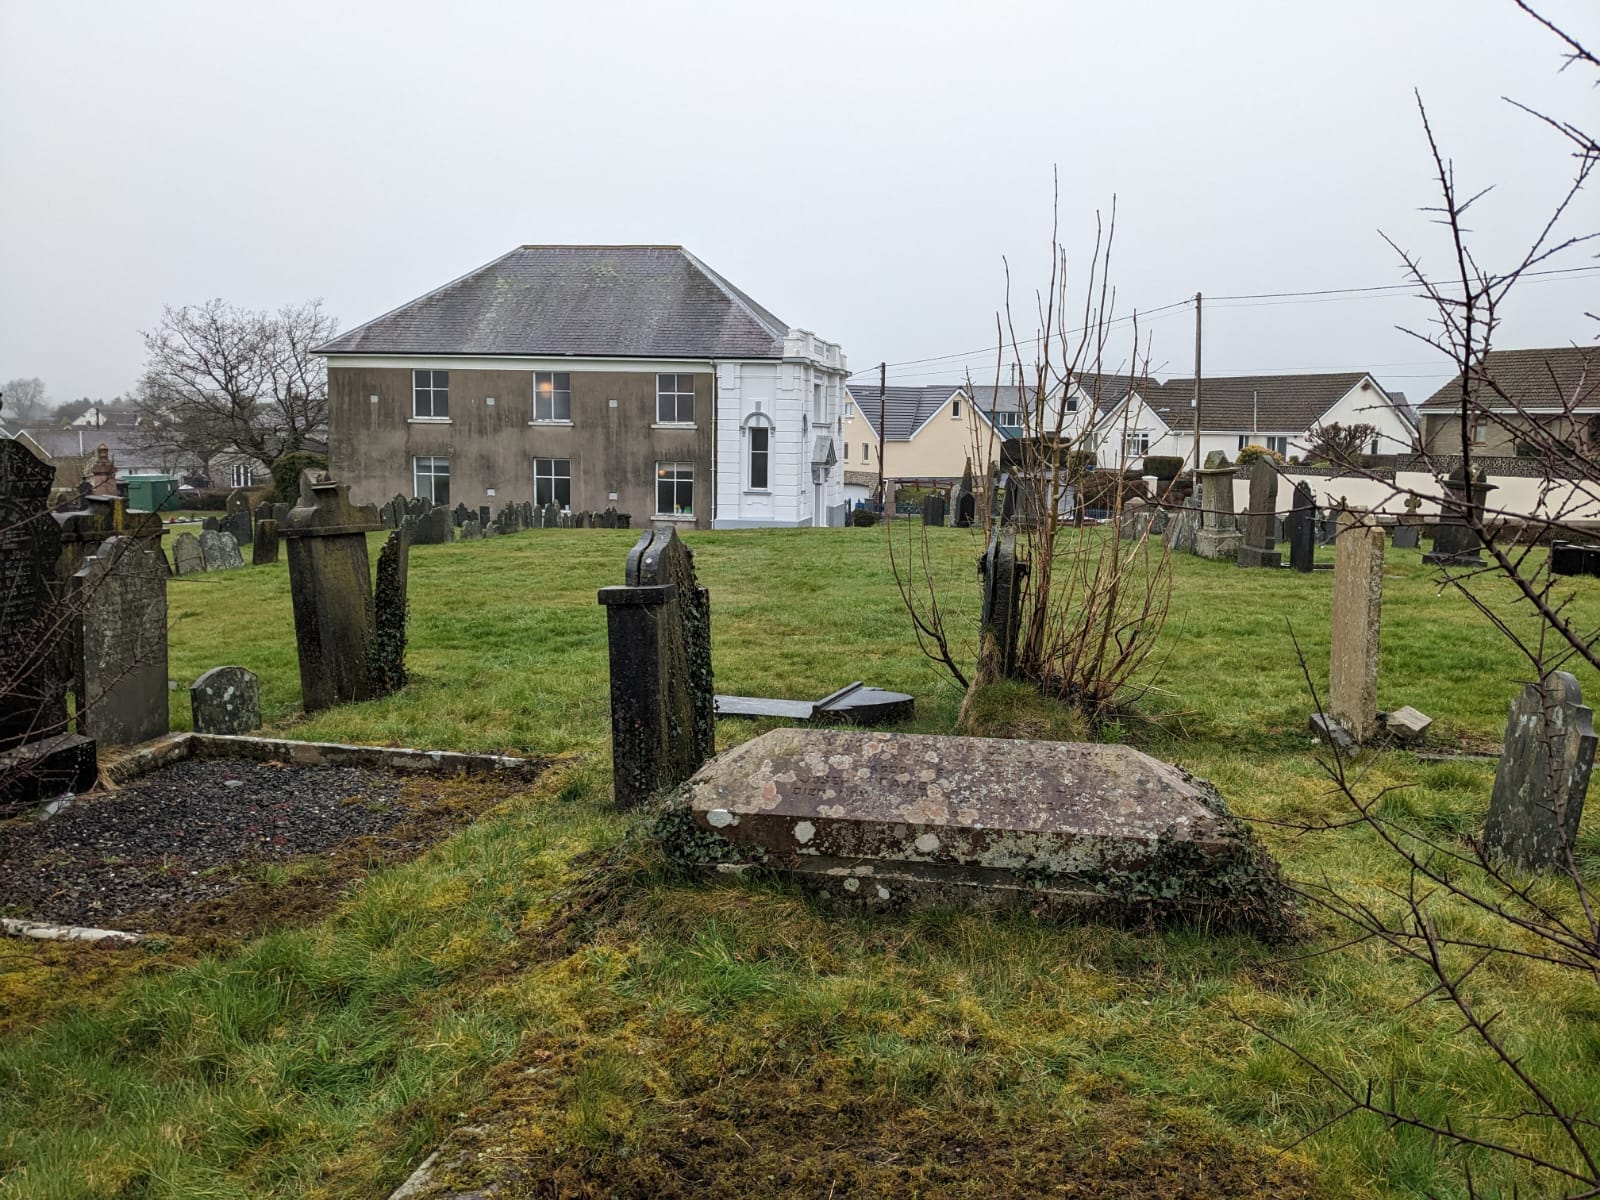 The chapel of Bethlehem St Clears in Carmarthenshire - a white front on a concrete building with six windows over two storeys showing in the middle distance. Several graves are in the foreground, with headstones and one large grave cover, and a green field is in the photo's centre.